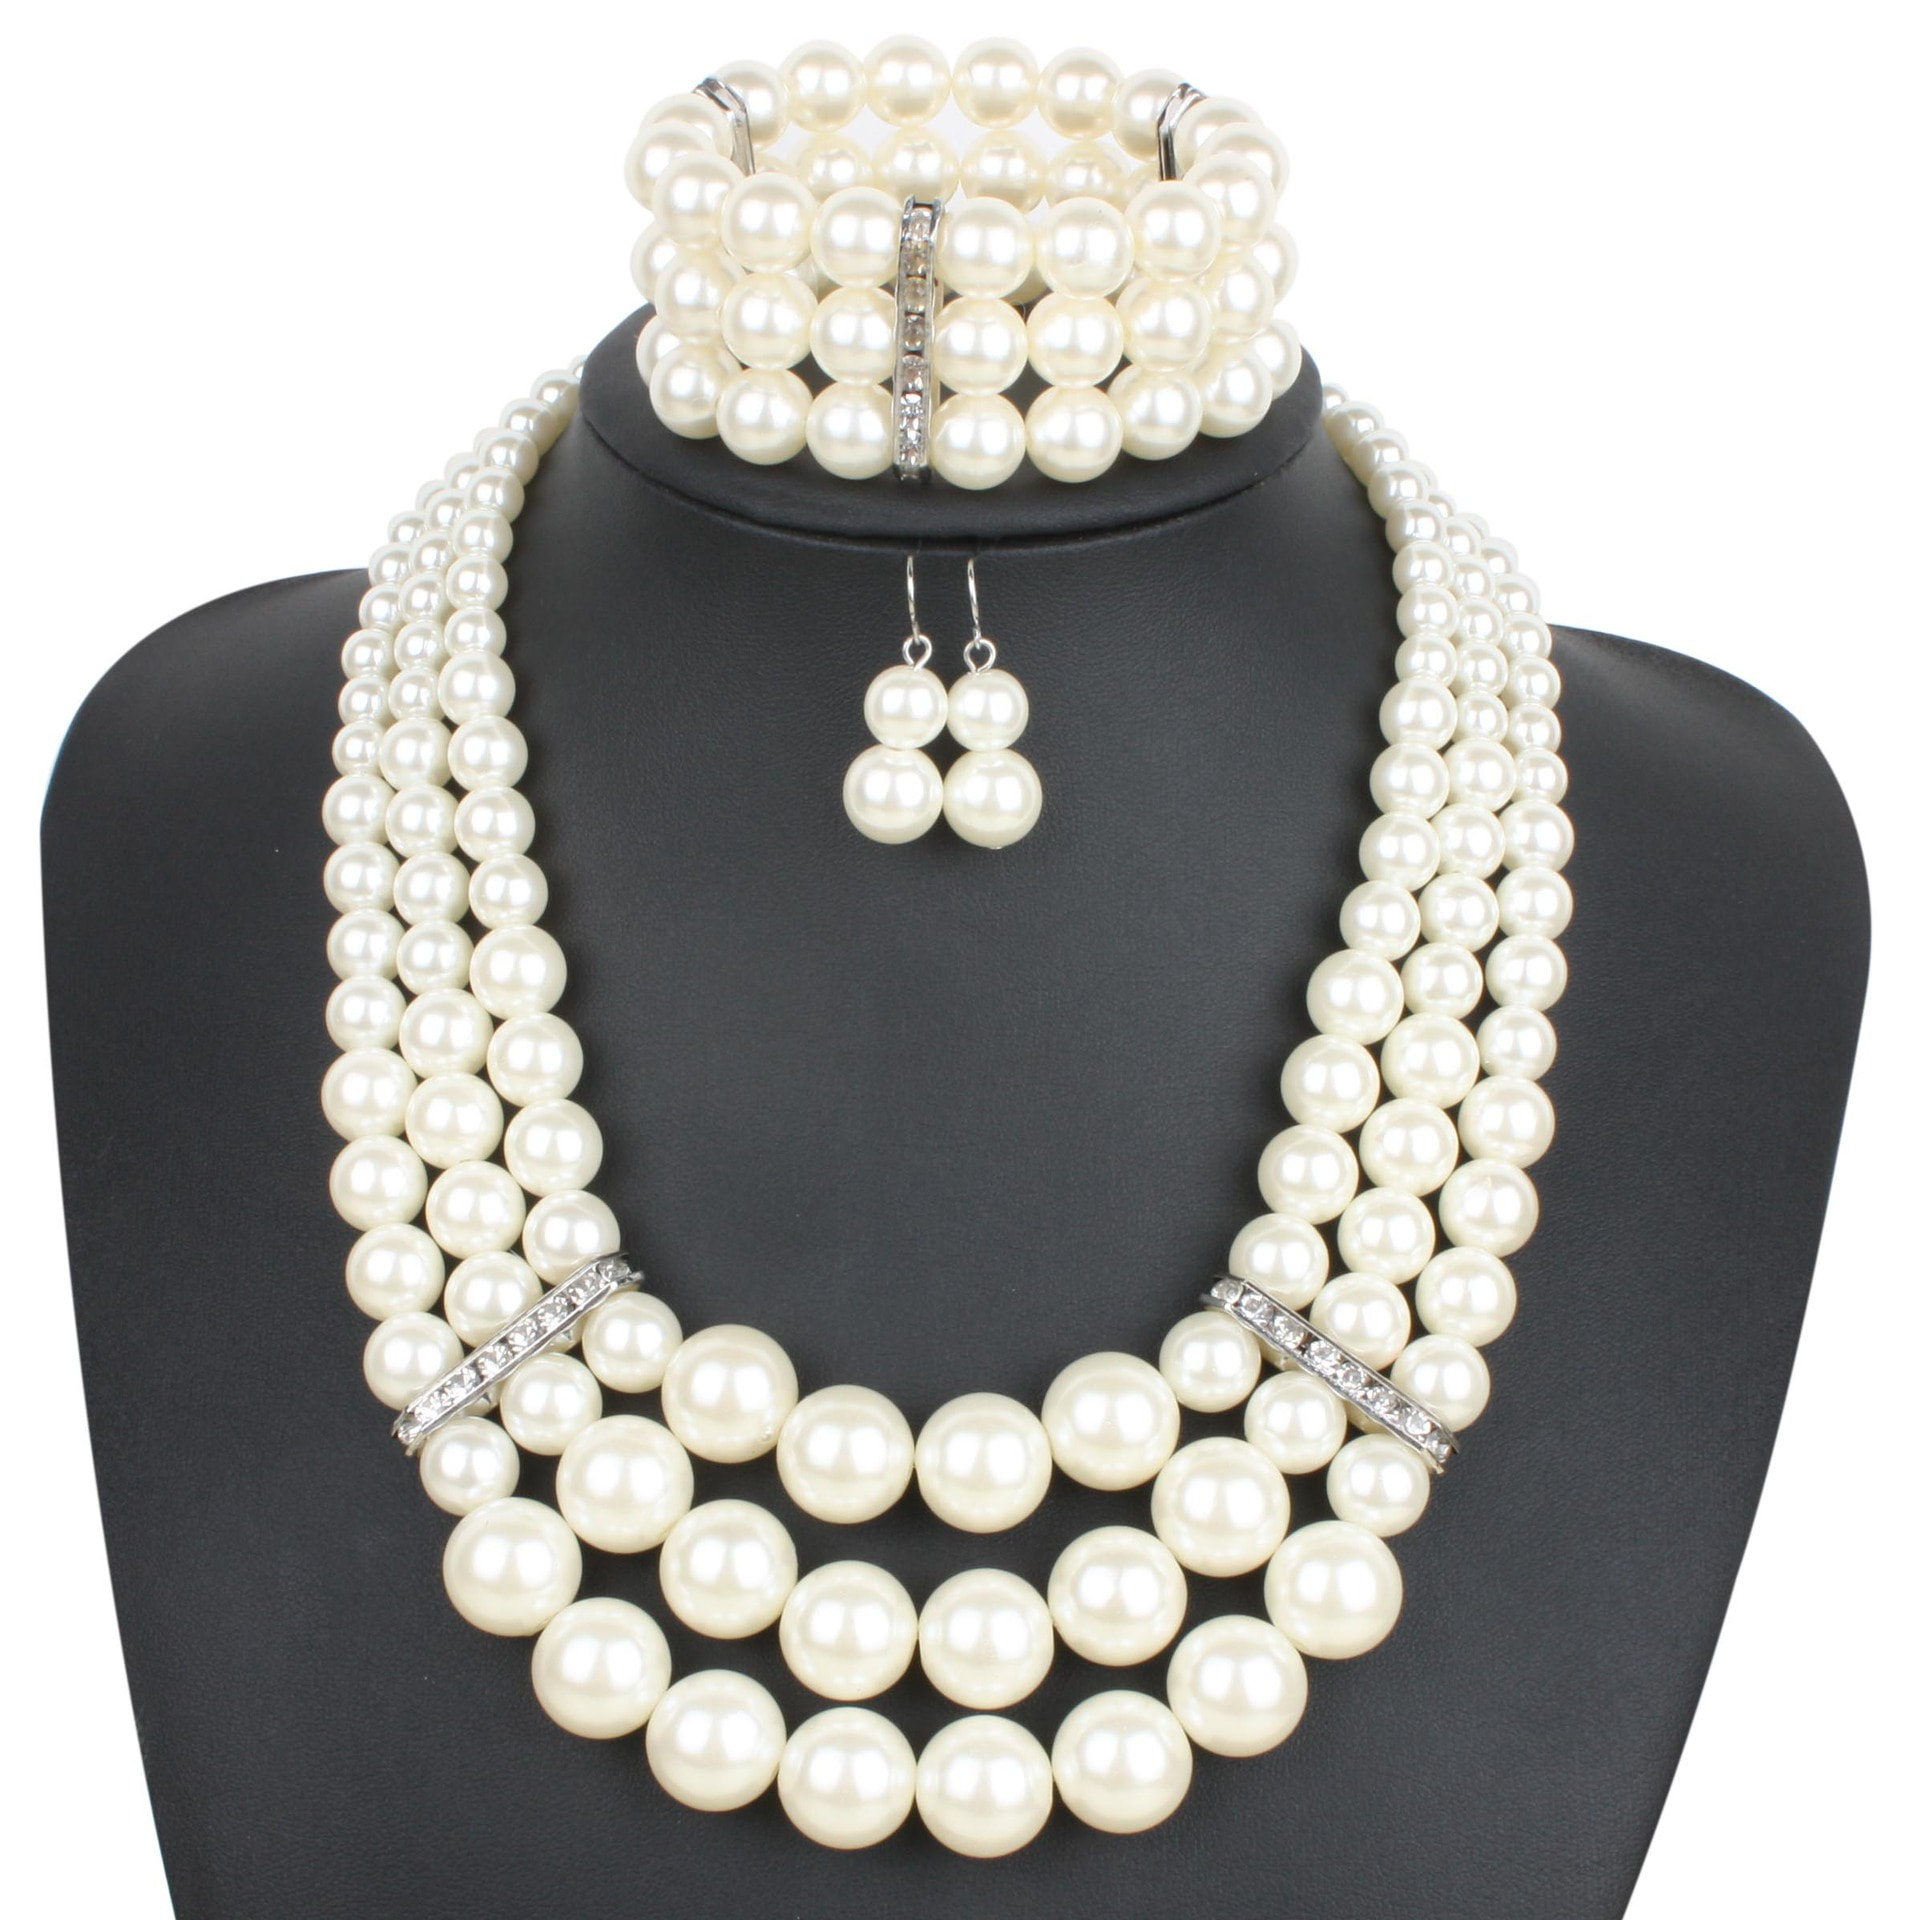 Piper Pearl Necklace Set | The High Priestess Jewellery & accessories